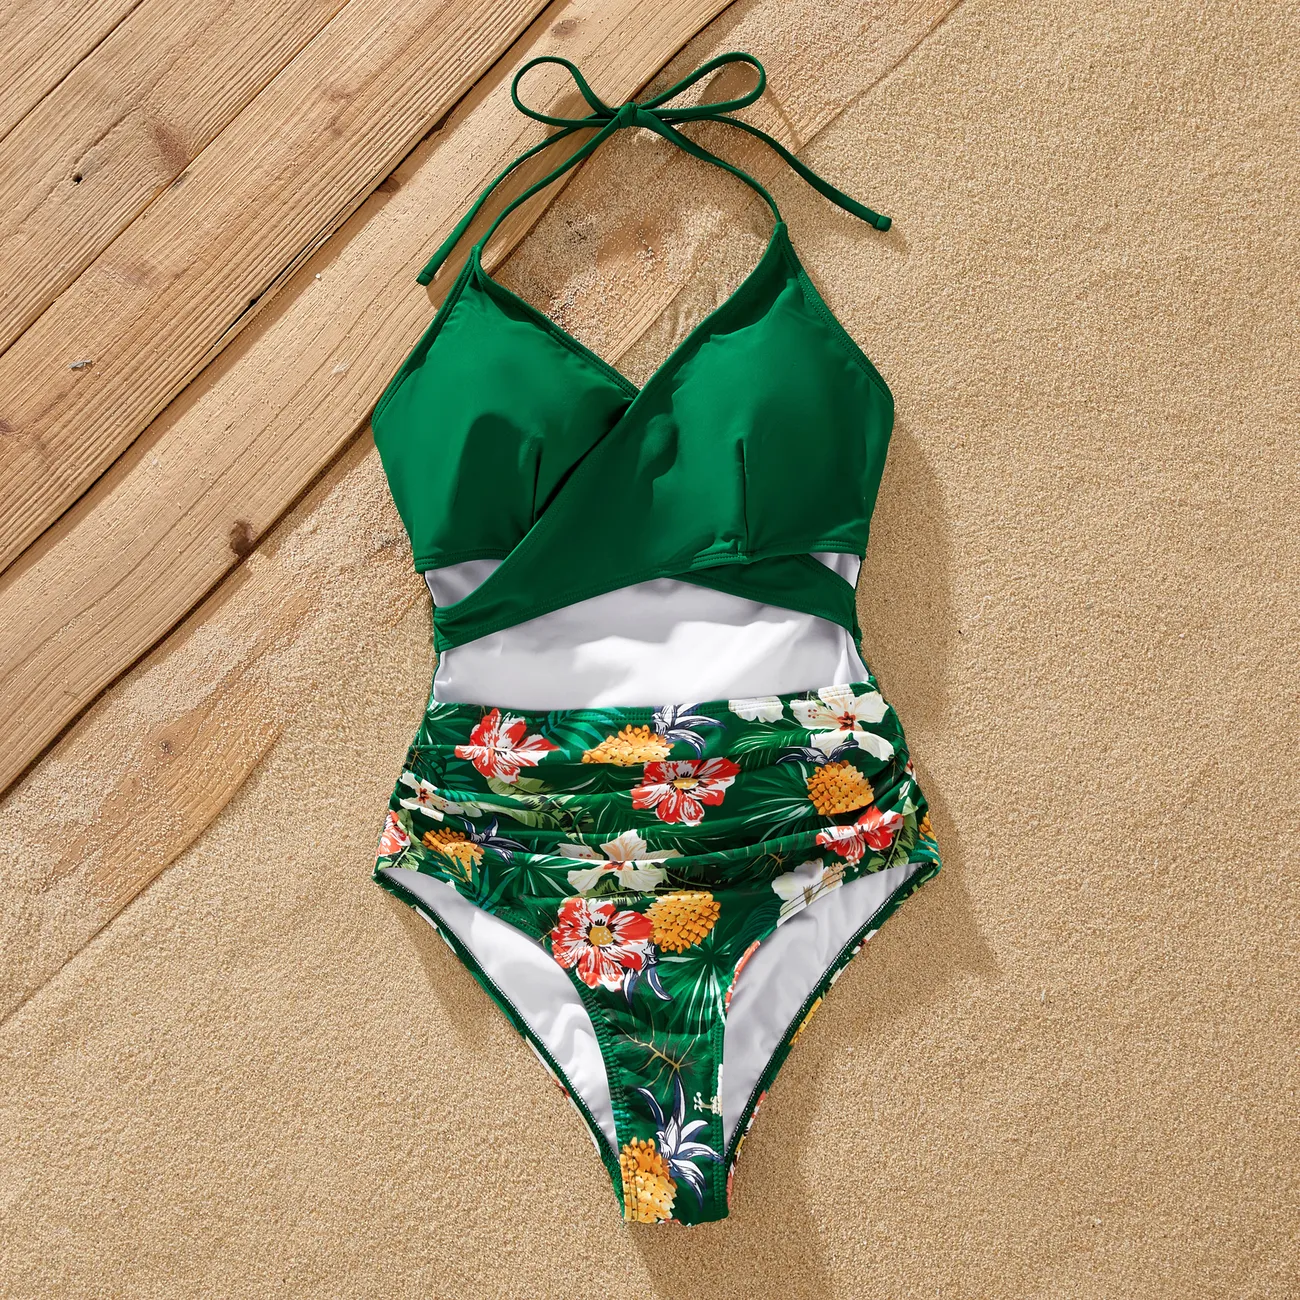 Family Matching Floral Drawstring Swim Trunks or Pineapple Pattern Halter One-Piece Swimsuit  SpringGreen big image 1